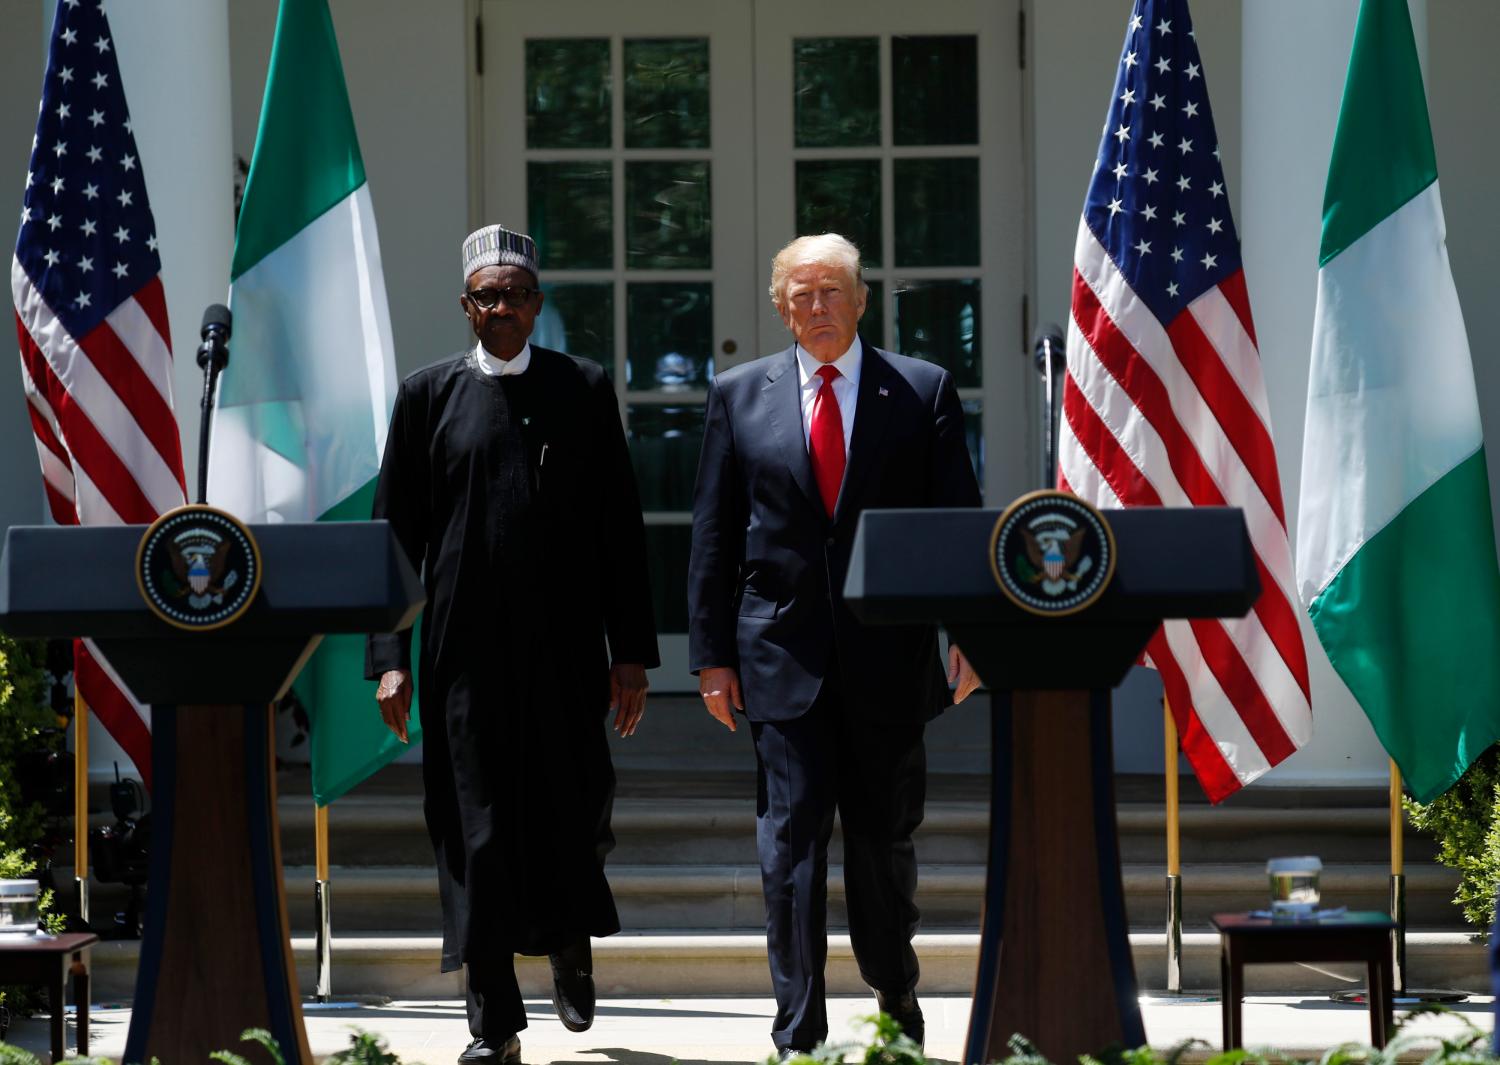 U.S. President Donald Trump arrives for a joint news conference with Nigeria's President Muhammadu Buhari in the Rose Garden of the White House in Washington, U.S., April 30, 2018. REUTERS/Kevin Lamarque - HP1EE4U1D88ID